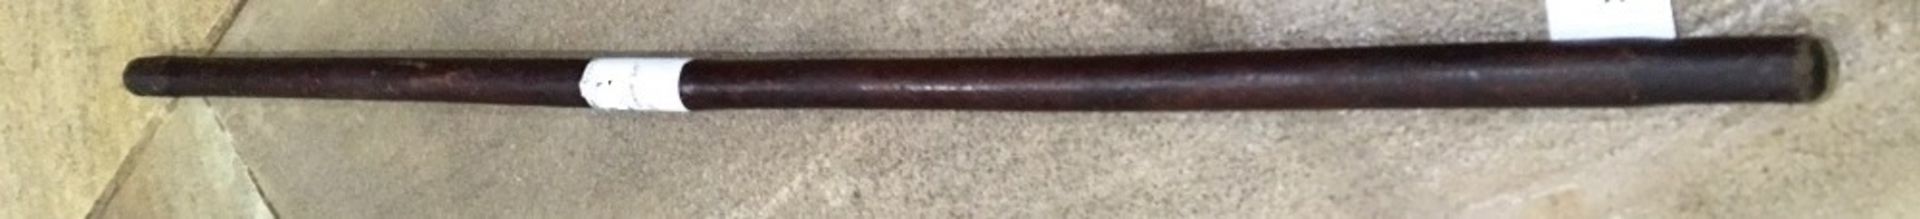 Leather show cane in good condition